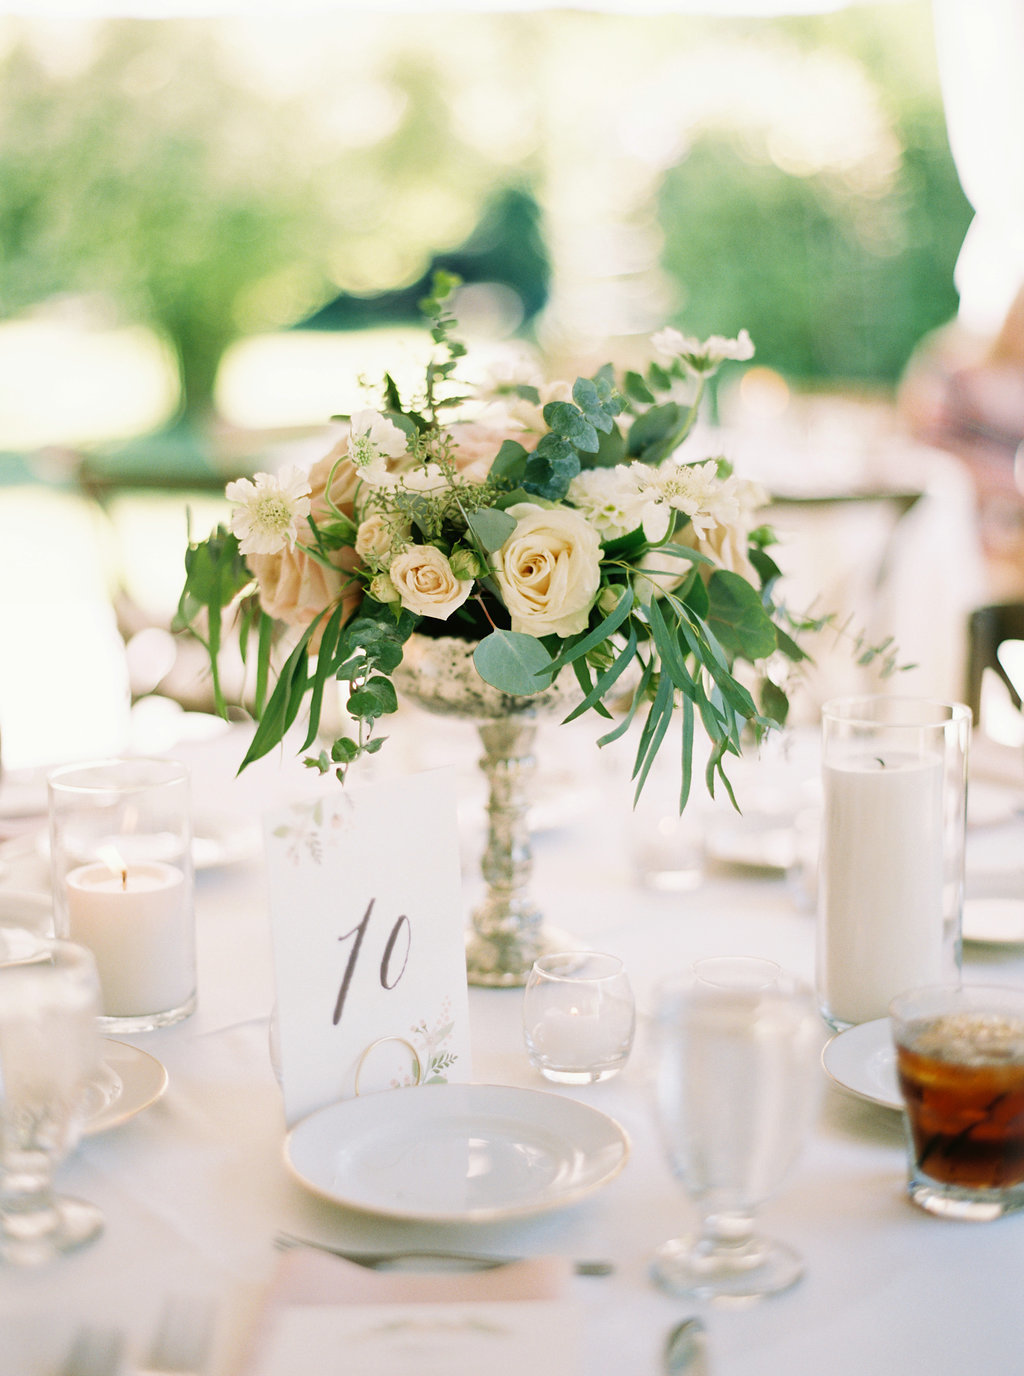 Silver compote arrangements with roses and spiral eucalyptus are perfect on the round tables at this wedding reception.